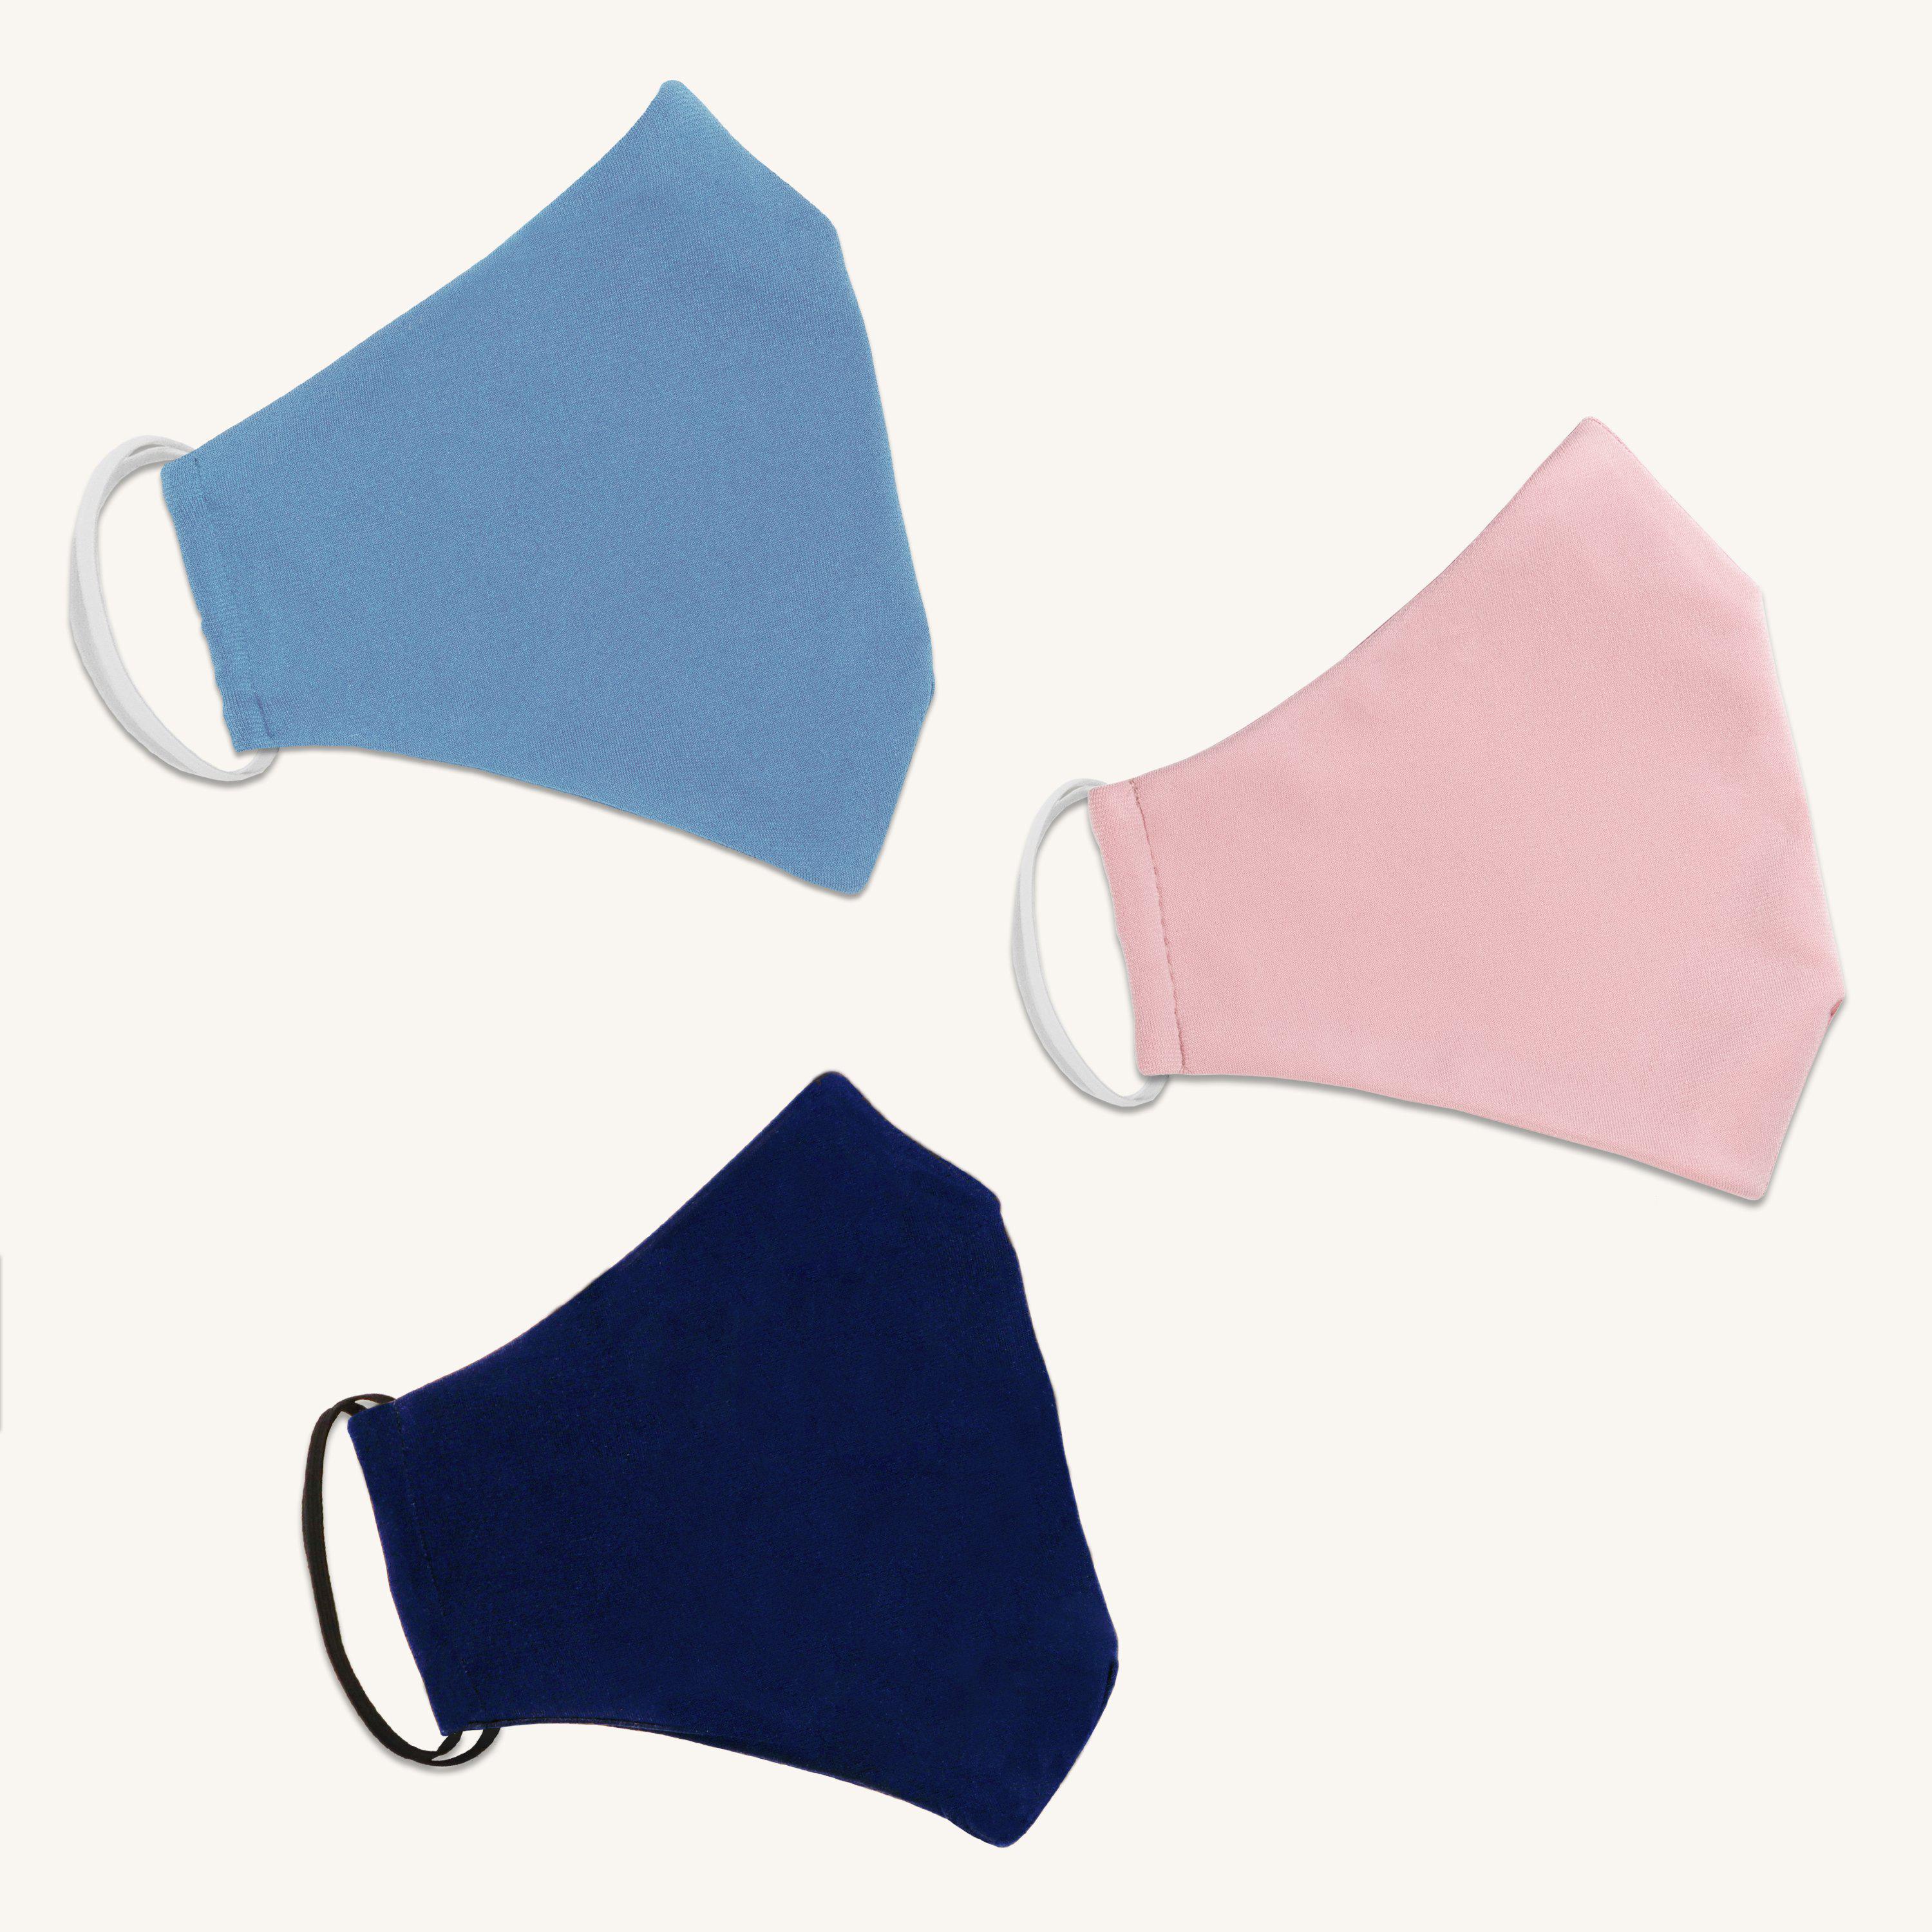 Woman posing wearing Multicolor The Essential Face Mask Multipack in Blue (Set of 3) from Connected Apparel